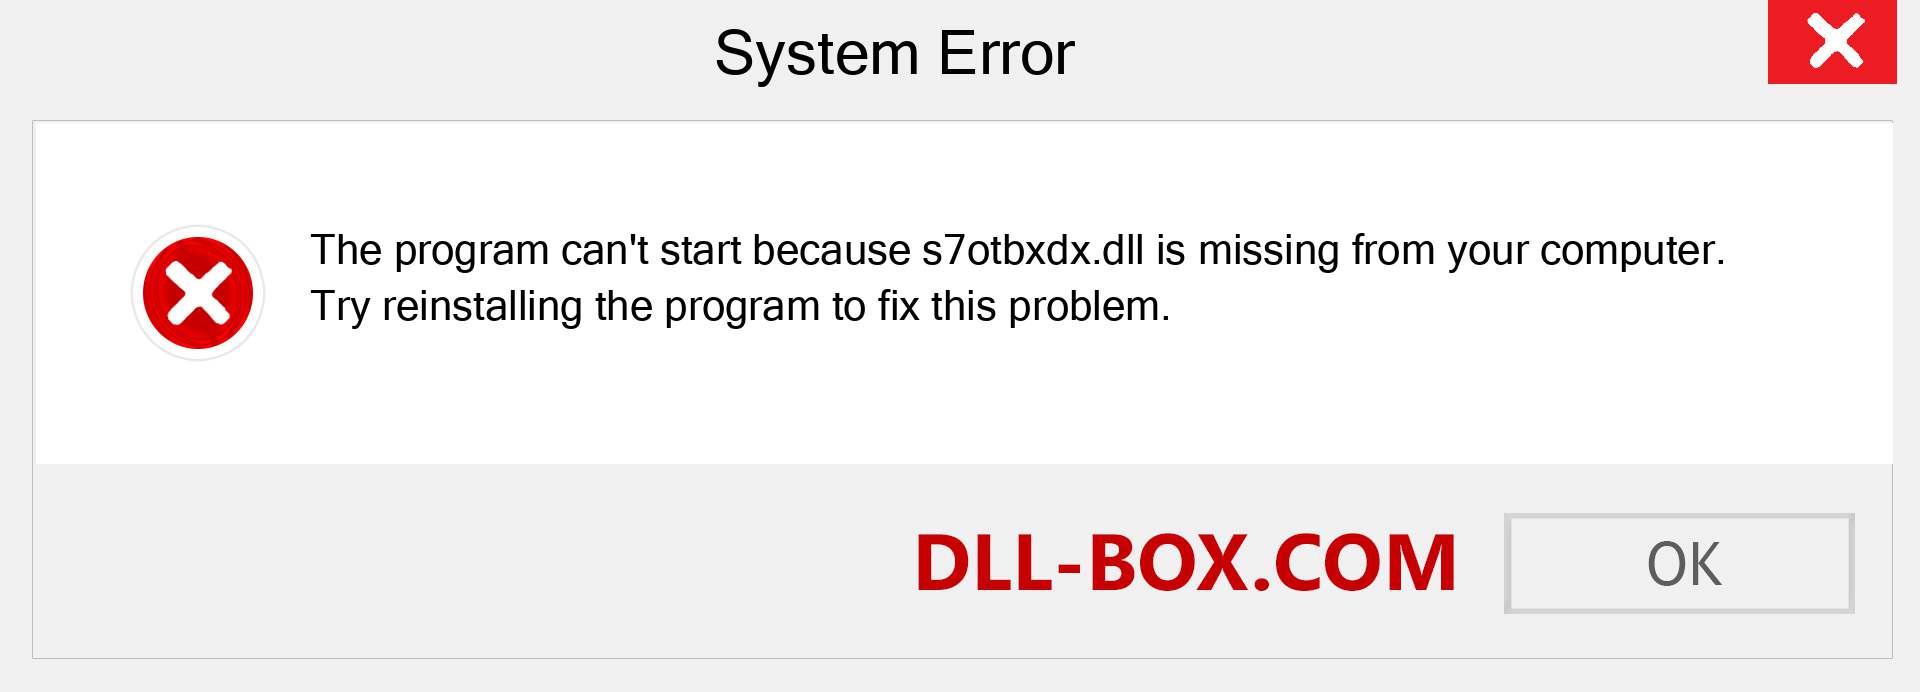  s7otbxdx.dll file is missing?. Download for Windows 7, 8, 10 - Fix  s7otbxdx dll Missing Error on Windows, photos, images